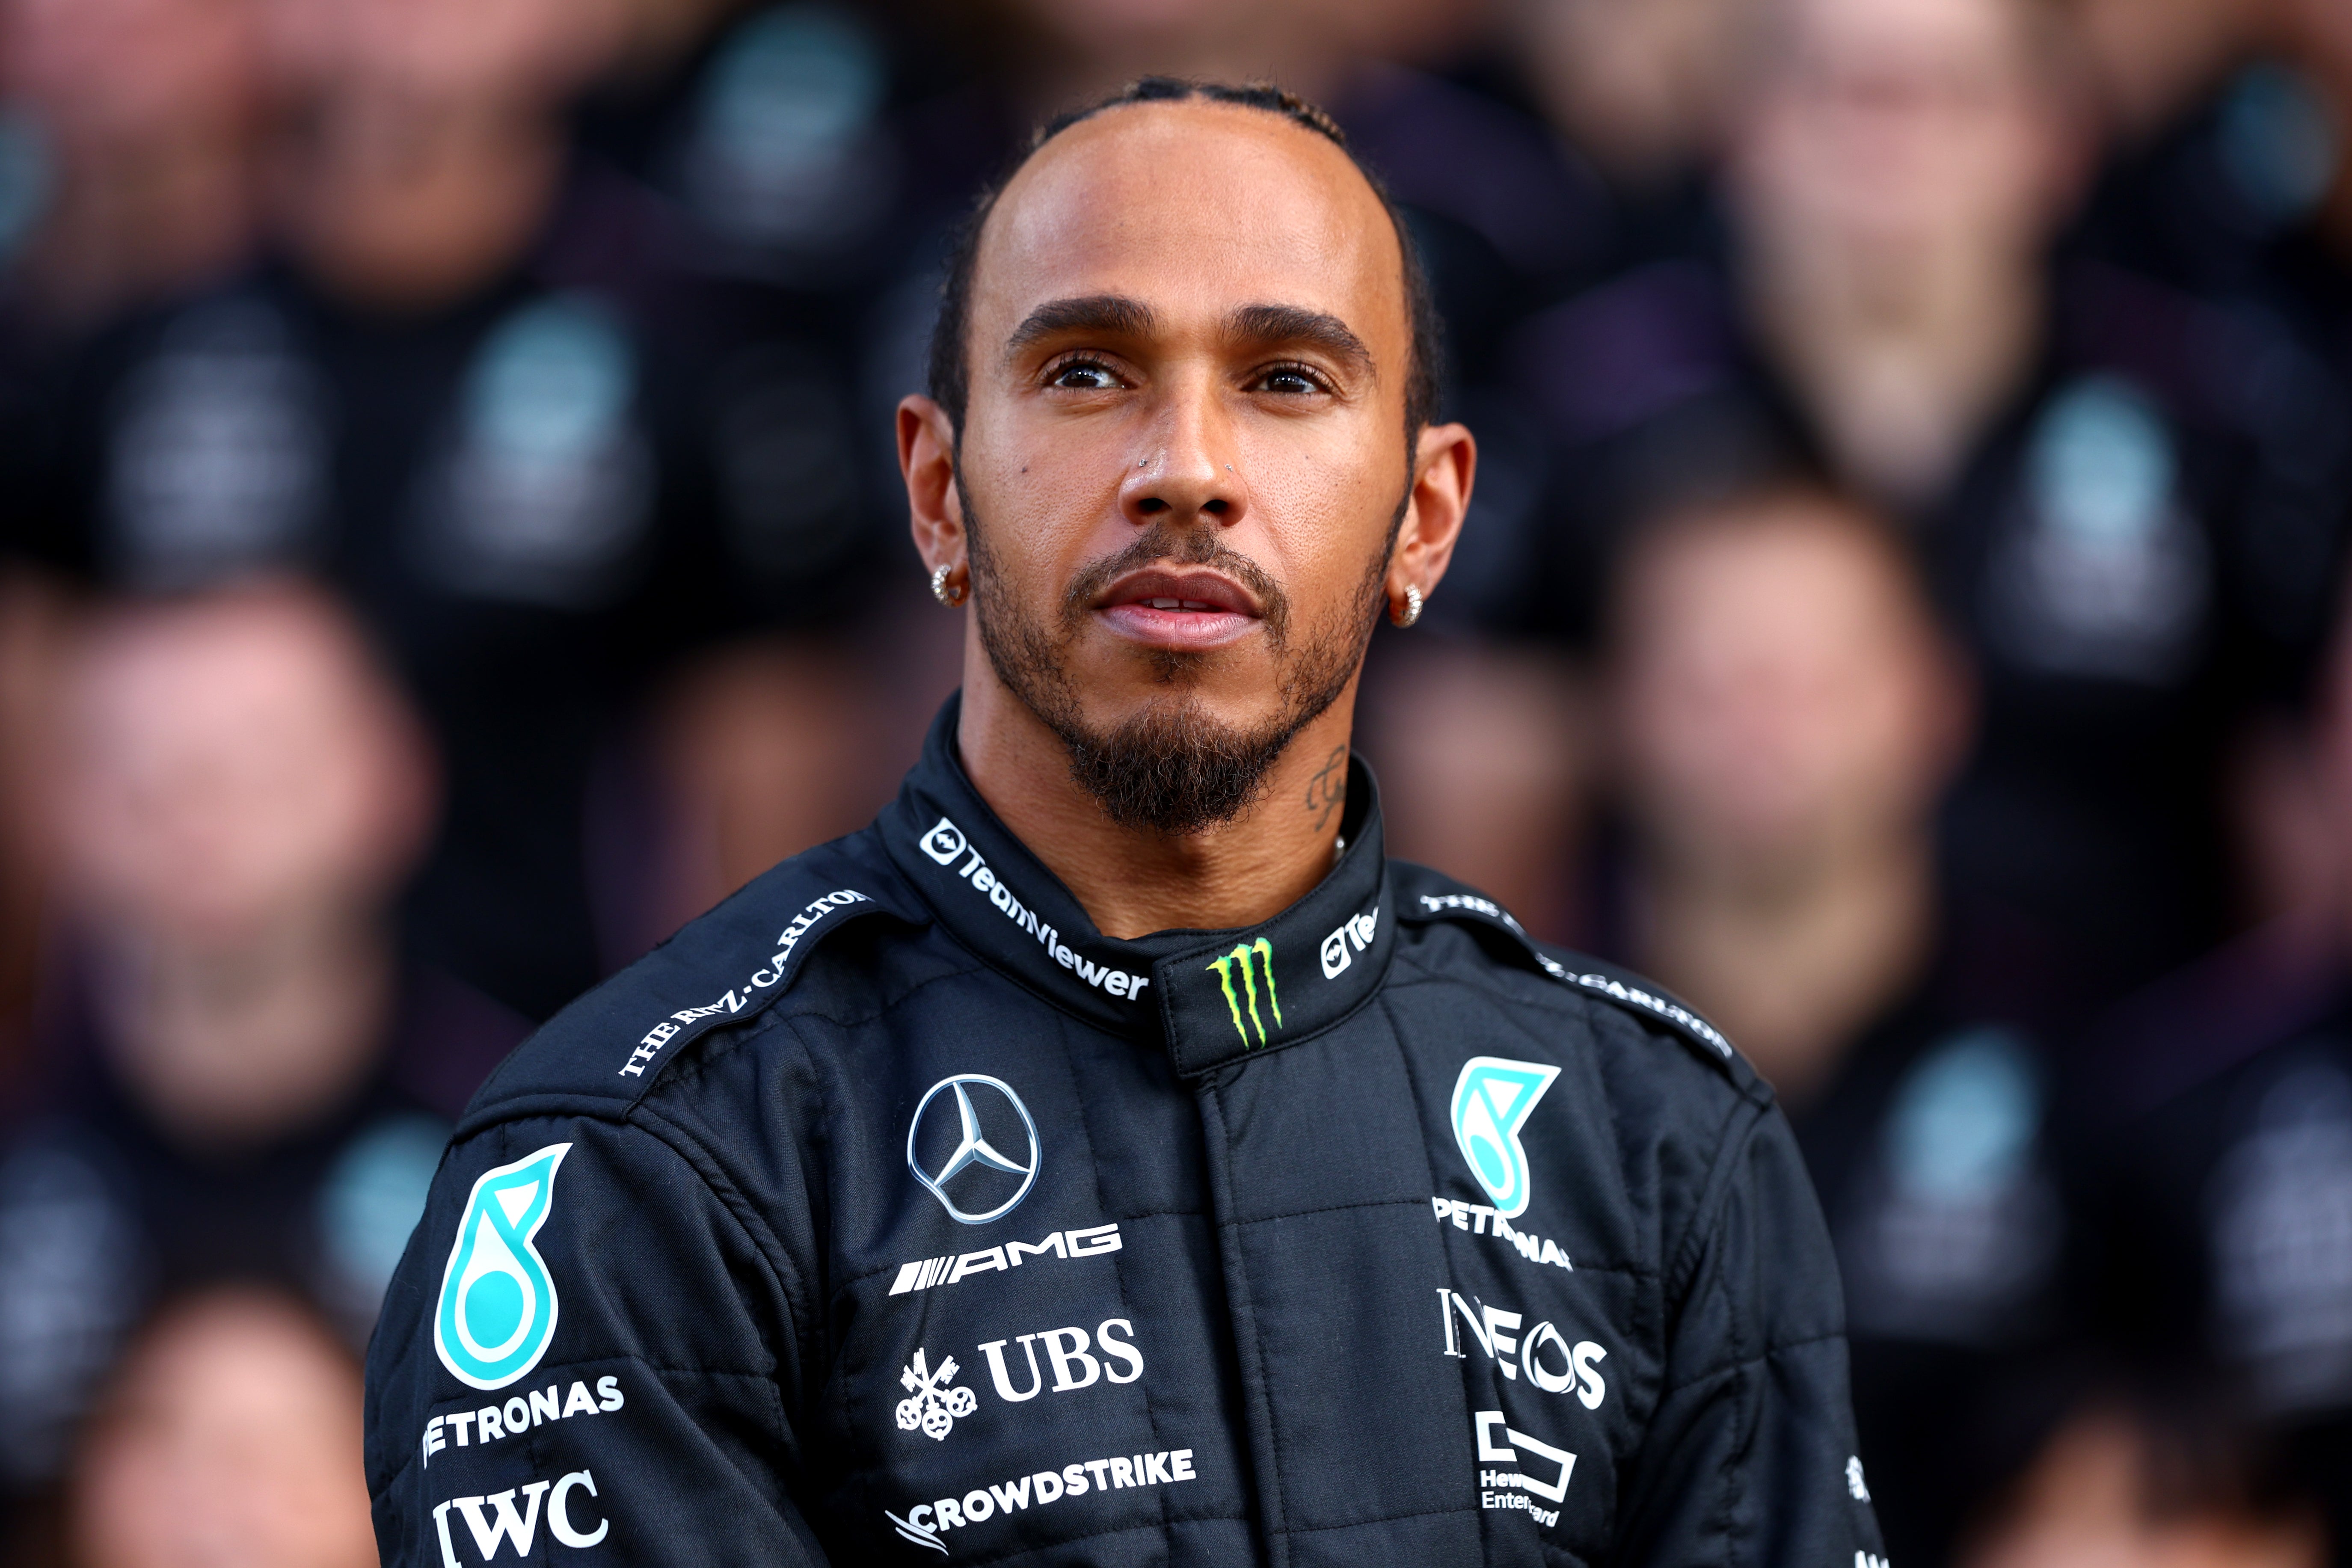 Lewis Hamilton failed to make Q3 for the second race running